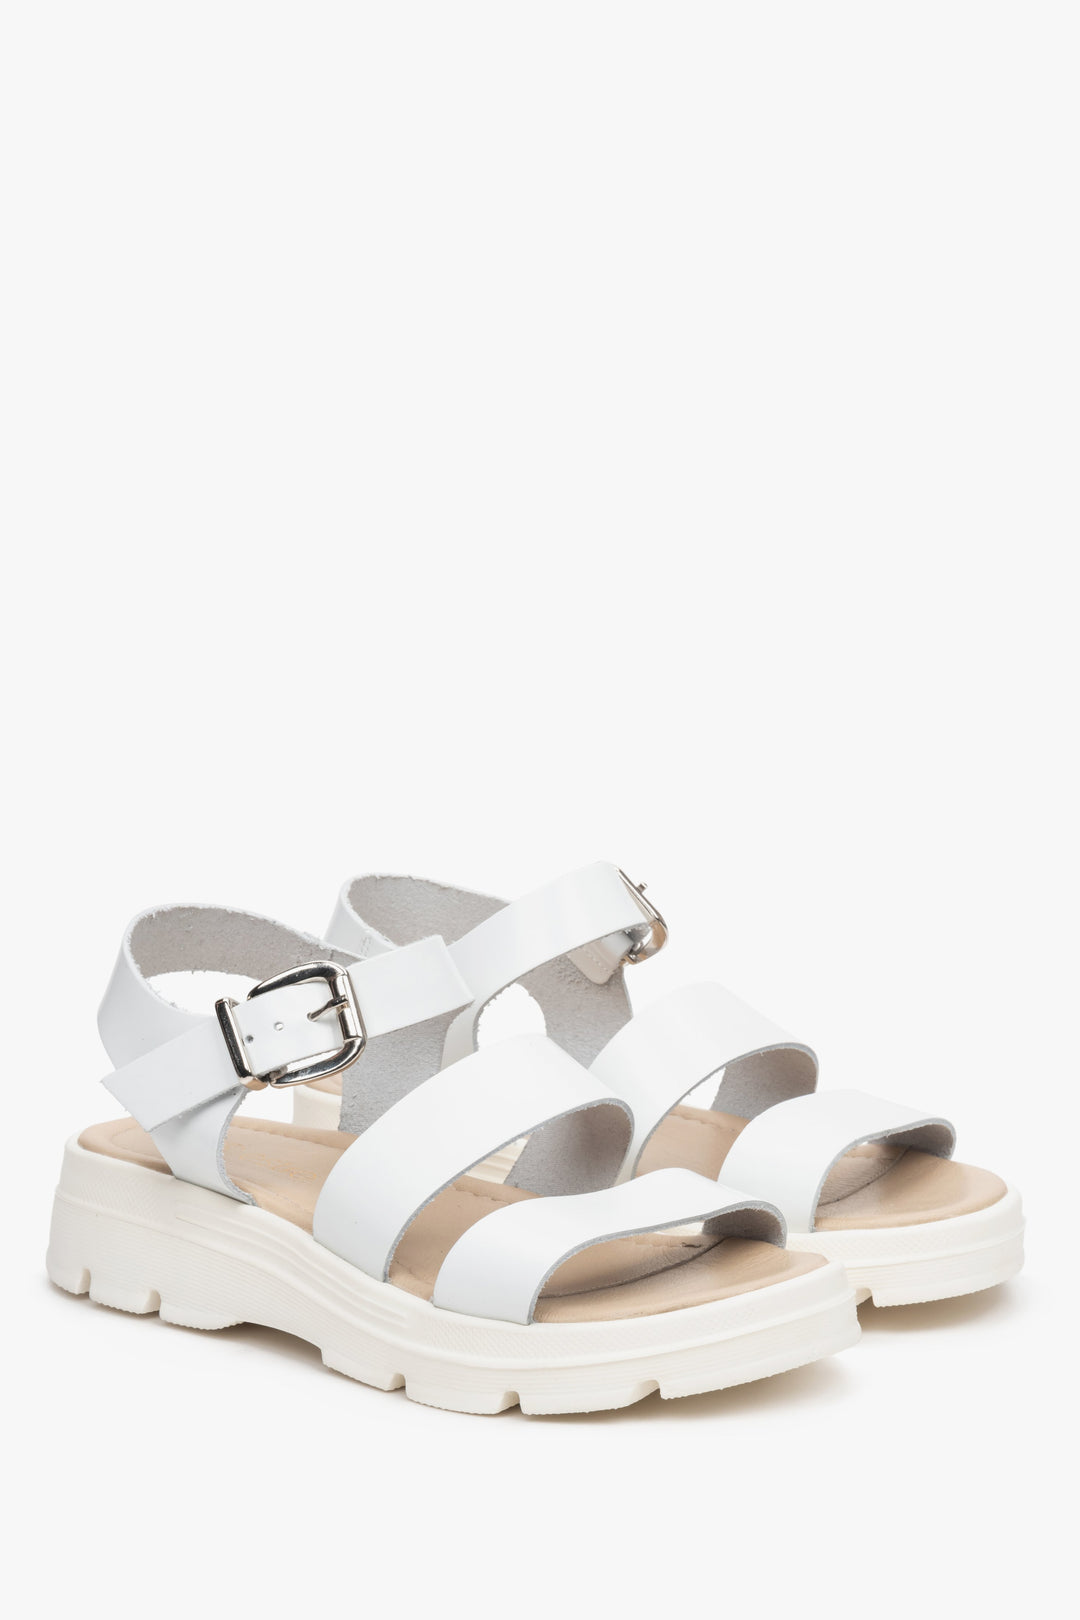 Women's sandals in white made of Italian natural leather, thick straps by Estro.